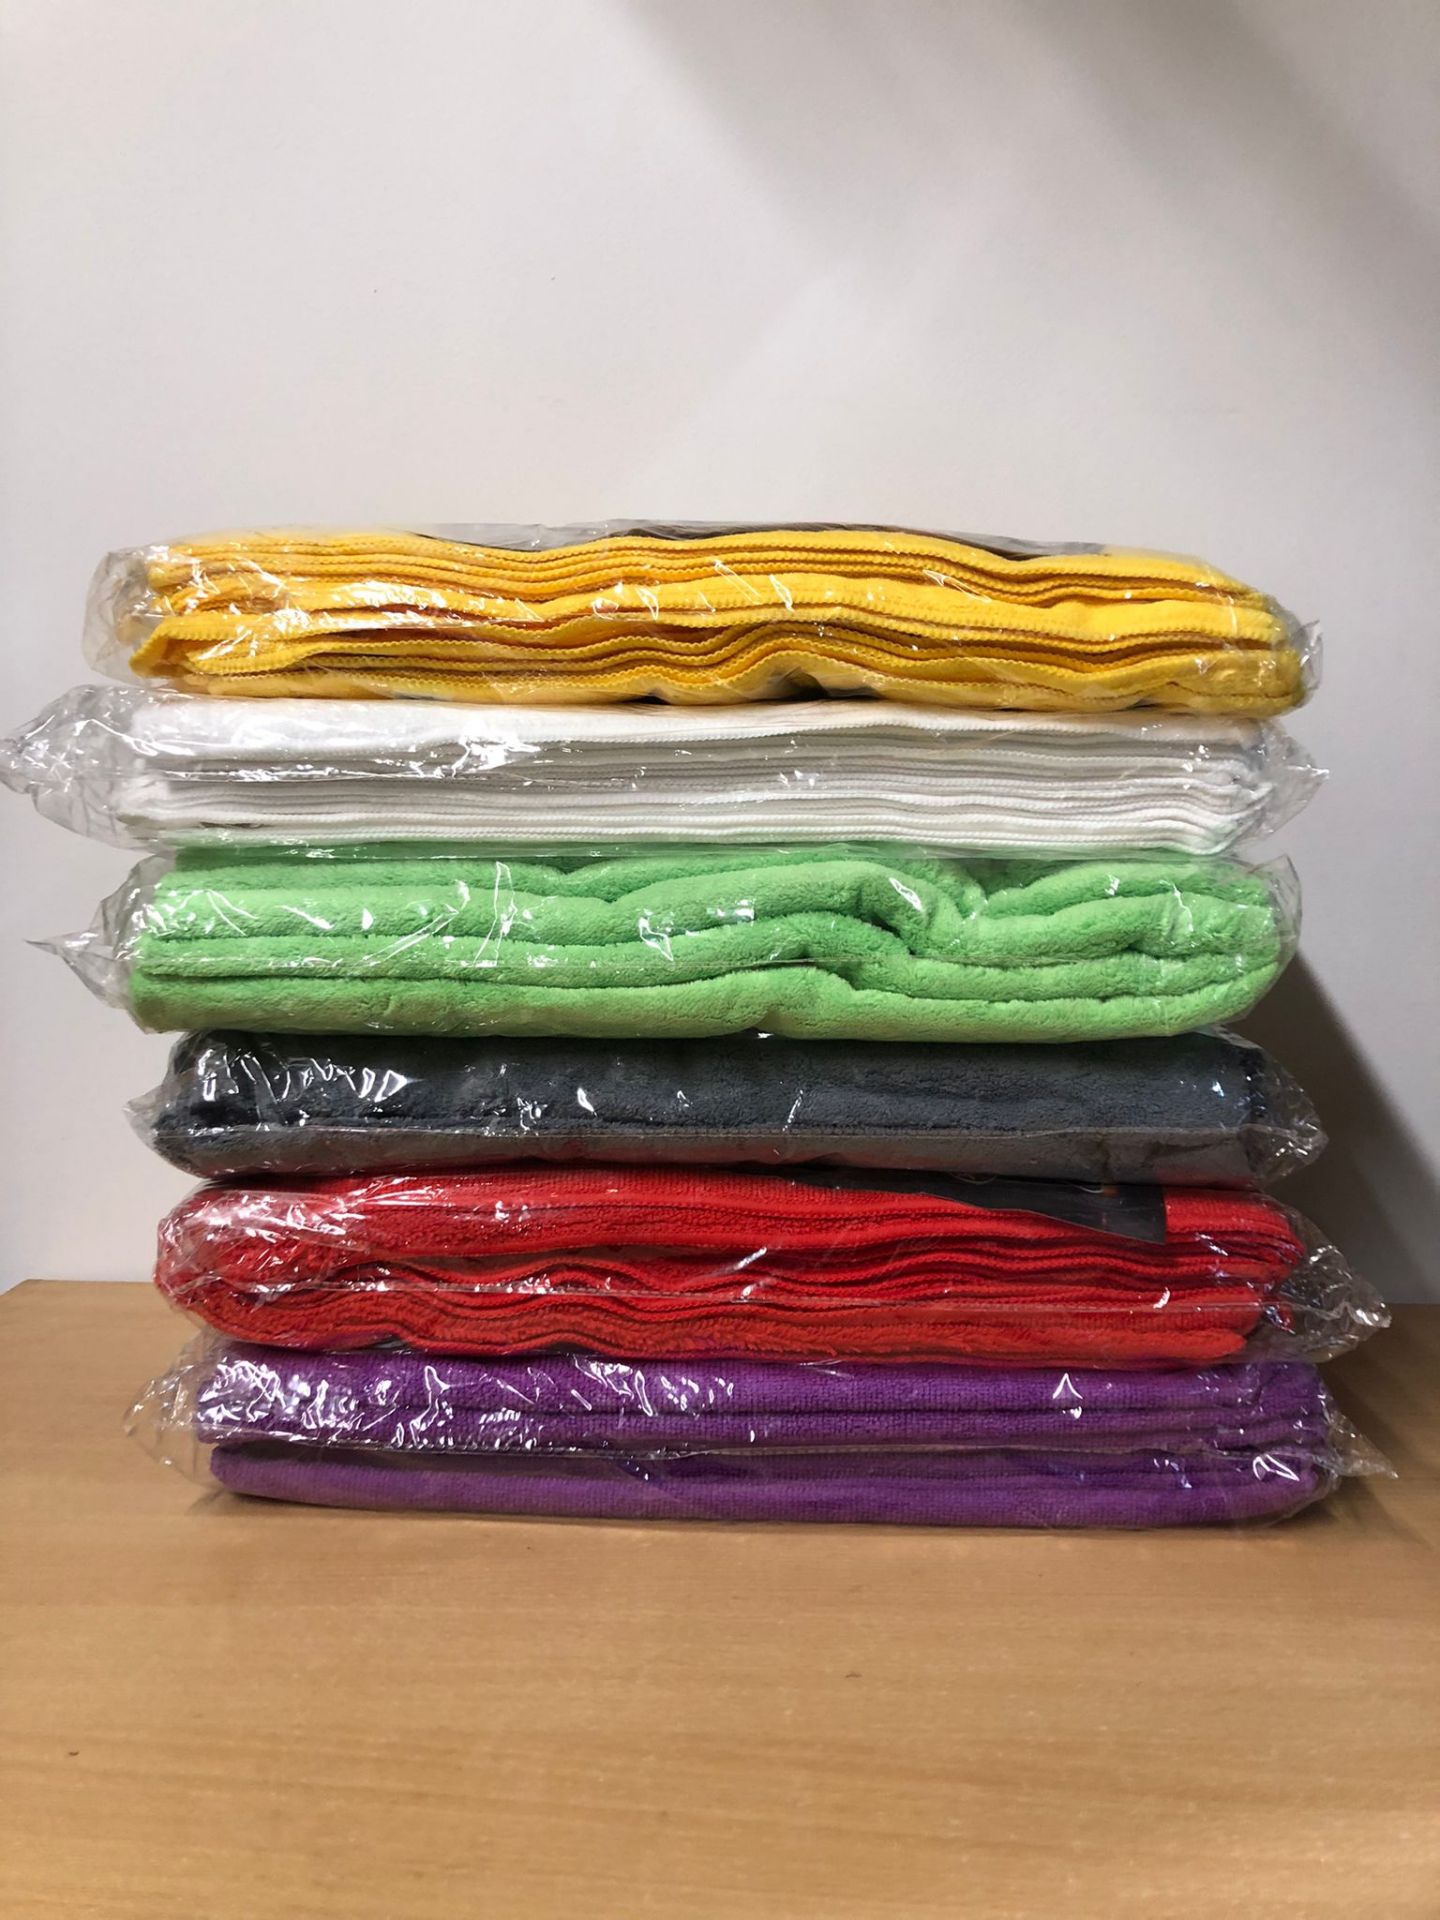 6 Packs of Detailing and Valeting Microfibre Cleaning Cloths Brand New 40 x 40cm - Image 8 of 9